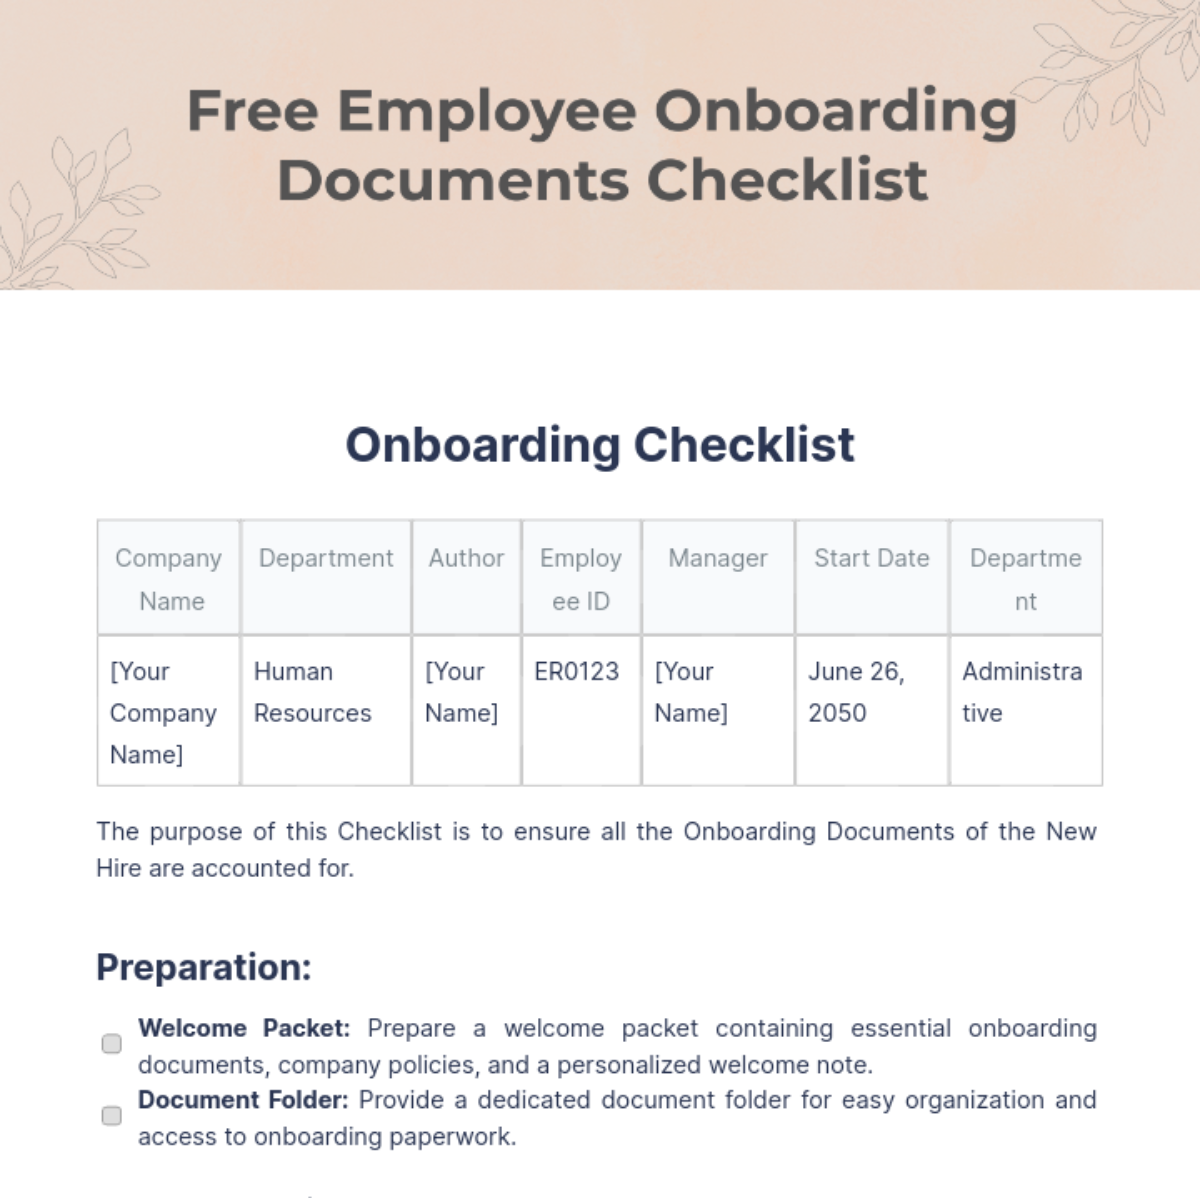 Free Employee Onboarding Documents Checklist Template